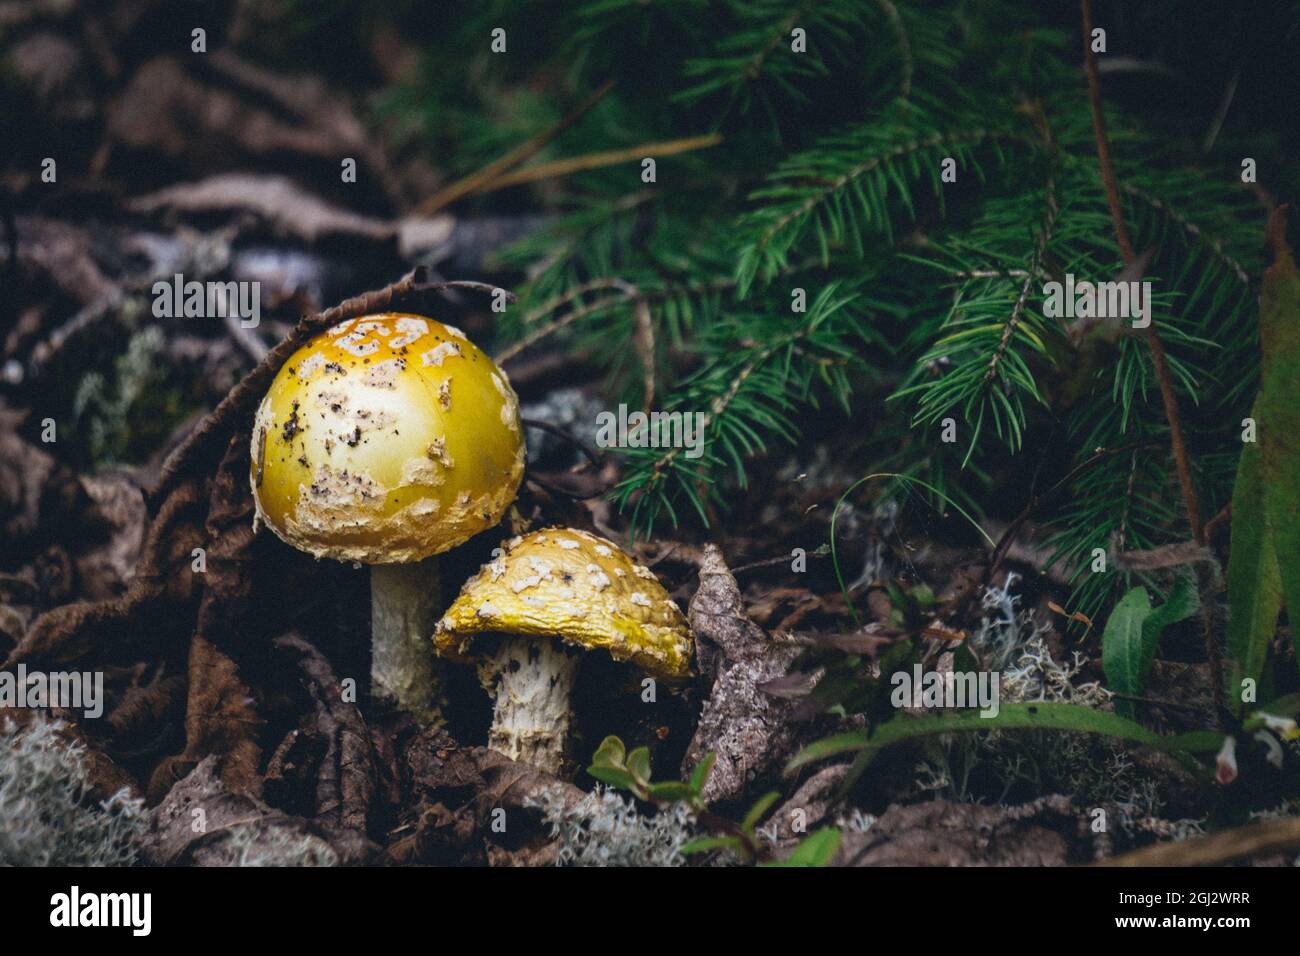 Yellow patches mushrooms, also known as yellow wart or Amanita flavoconia in Pointe aux Outardes nature park in Quebec region of Cote Nord, Canada Stock Photo